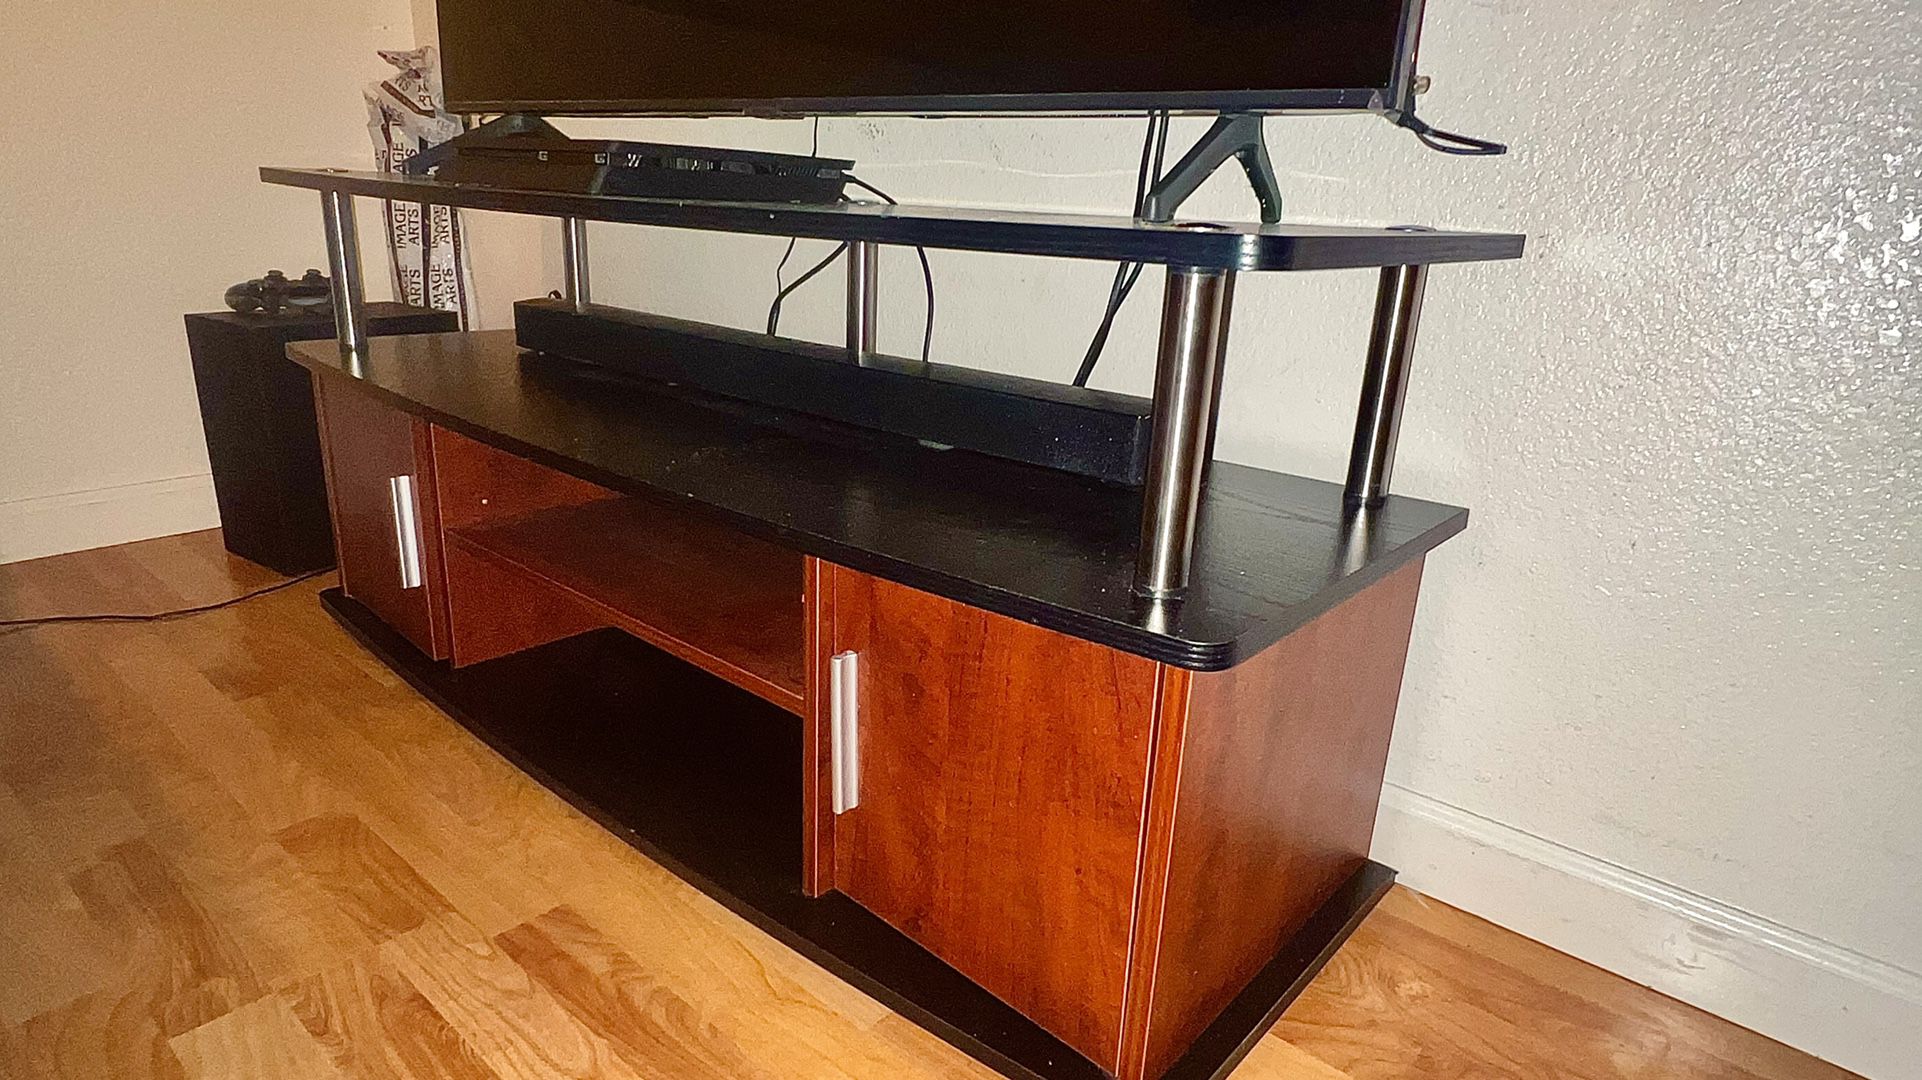 TV STAND 